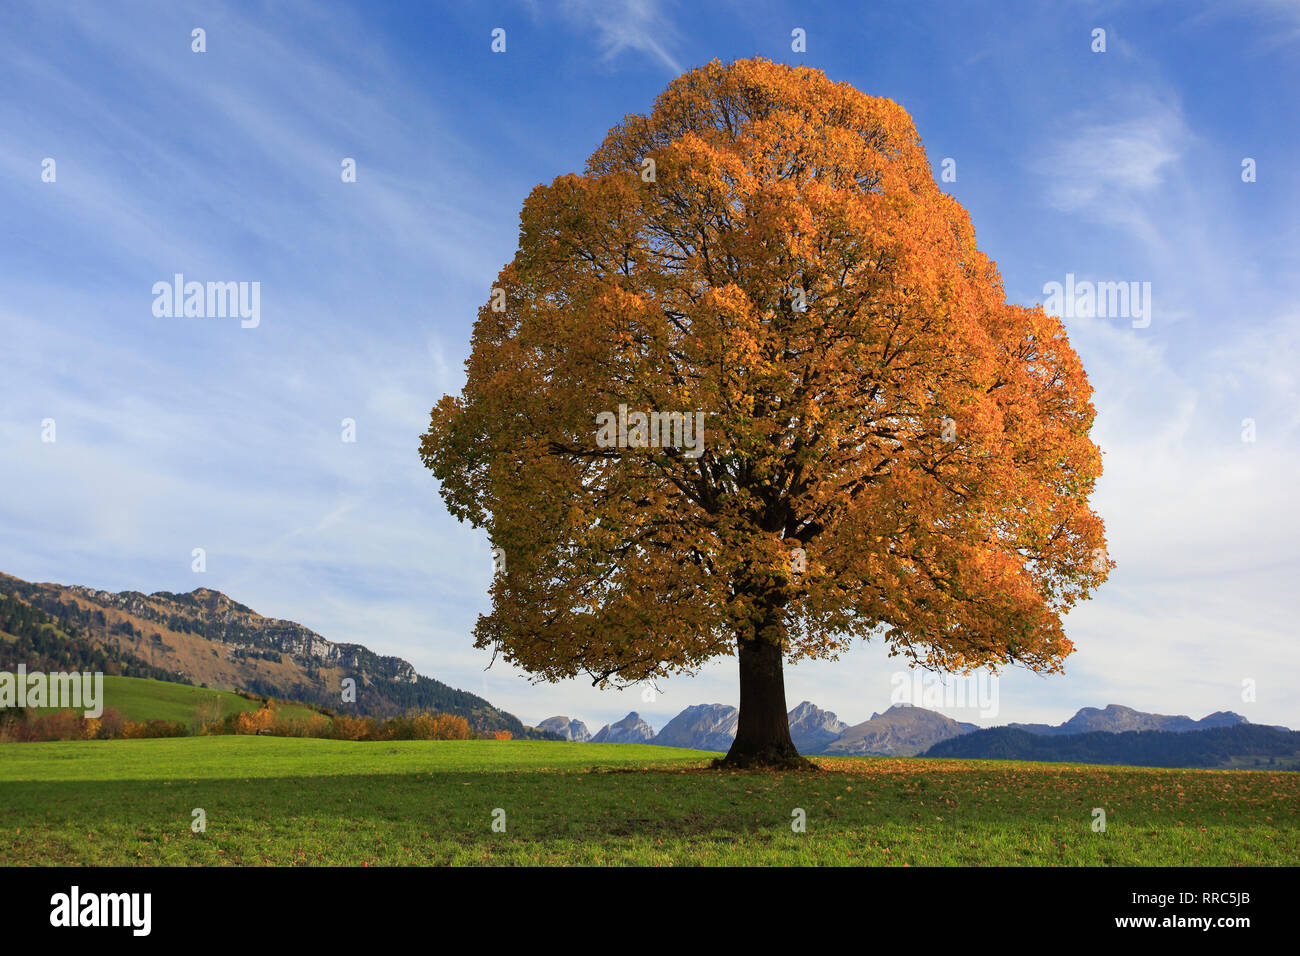 La botanica, calce autunnale, Svizzera, Additional-Rights-Clearance-Info-Not-Available Foto Stock